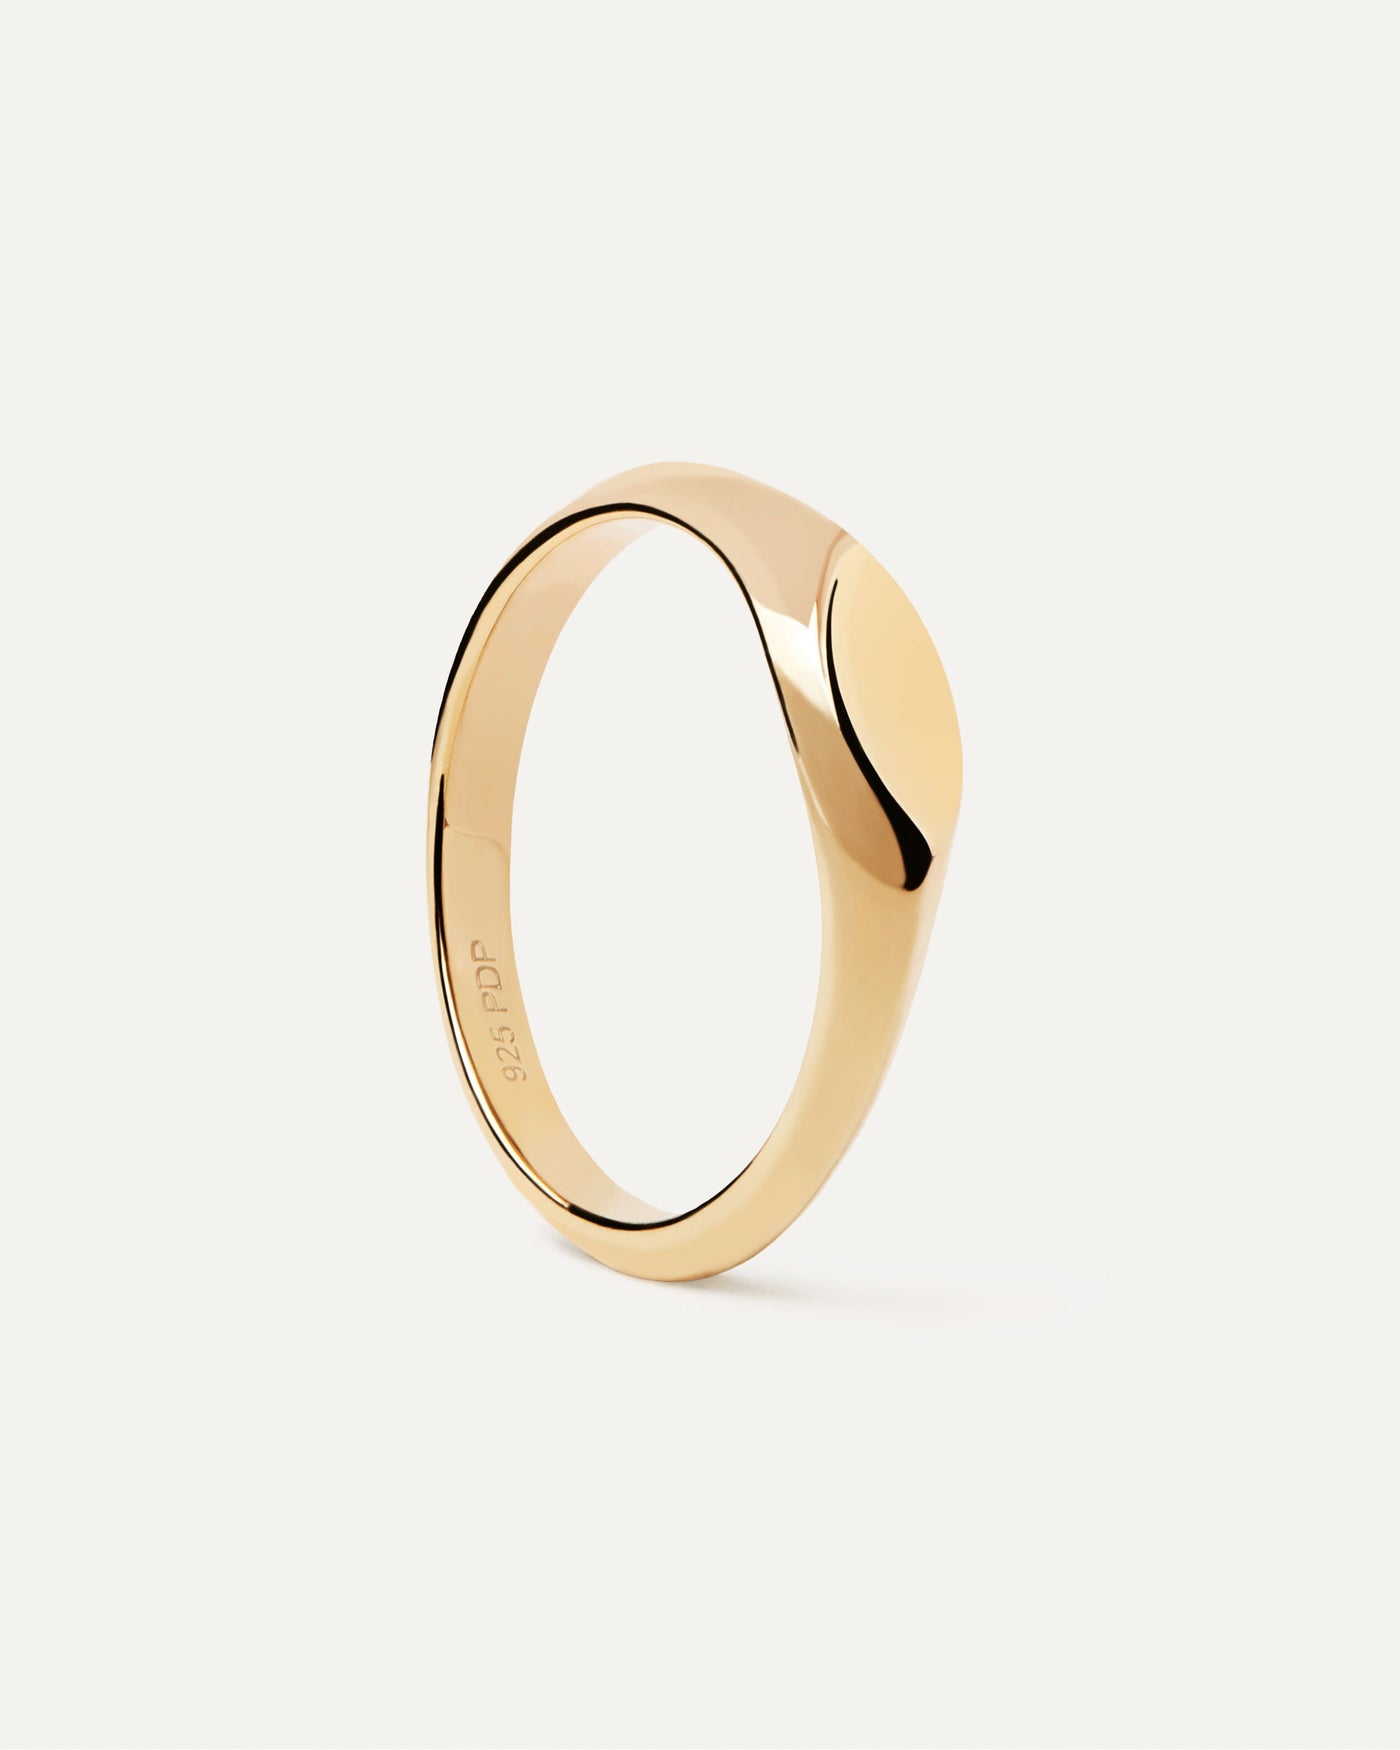 2023 Selection | Duke Stamp Ring. Gold-plated slim signet ring with eye shape flat top design. Get the latest arrival from PDPAOLA. Place your order safely and get this Best Seller. Free Shipping.